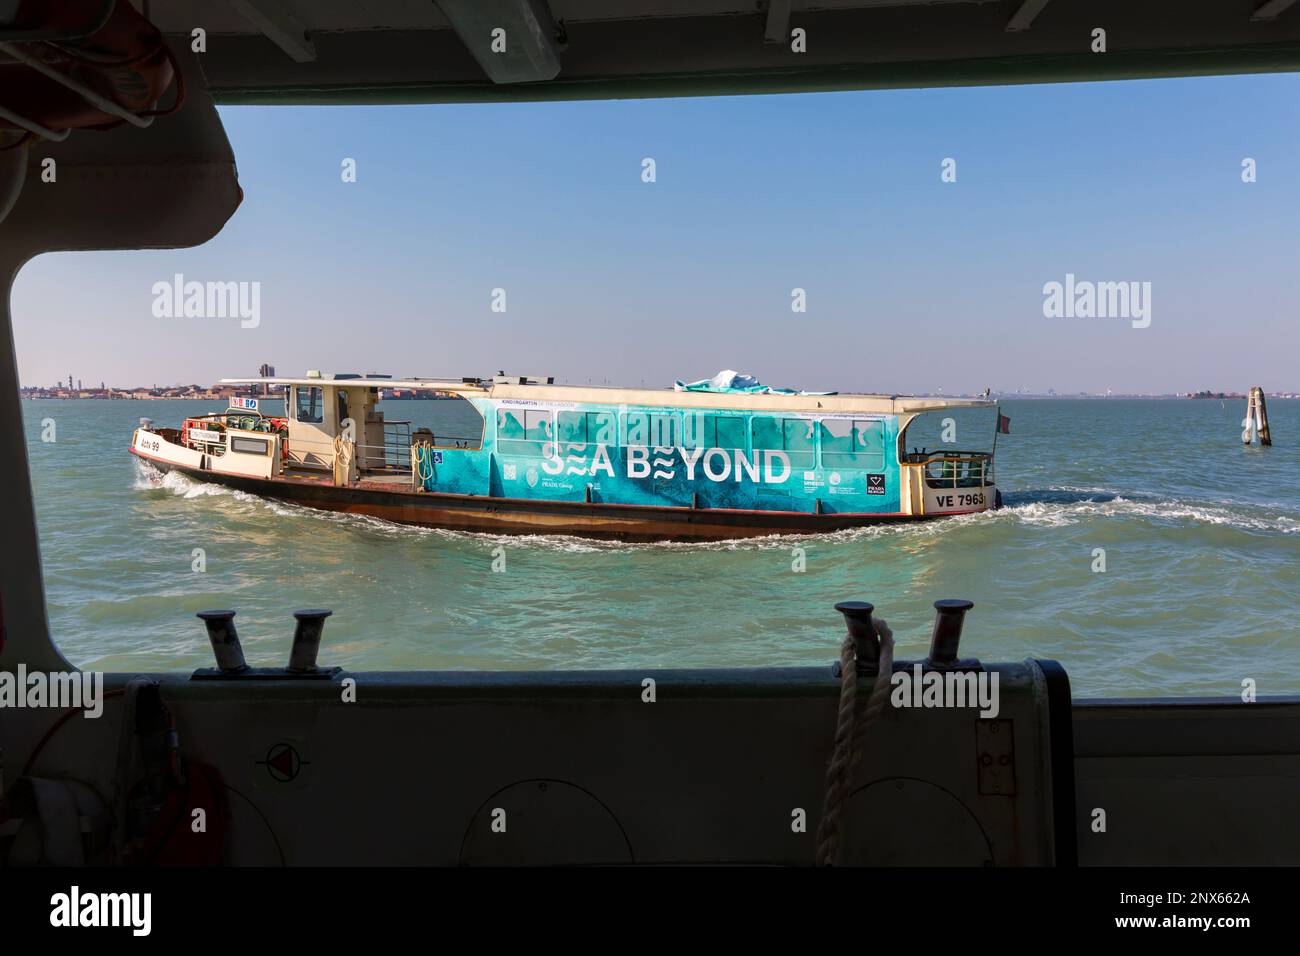 Sea Beyond water bus at Murano, Venice, Italy in February Stock Photo